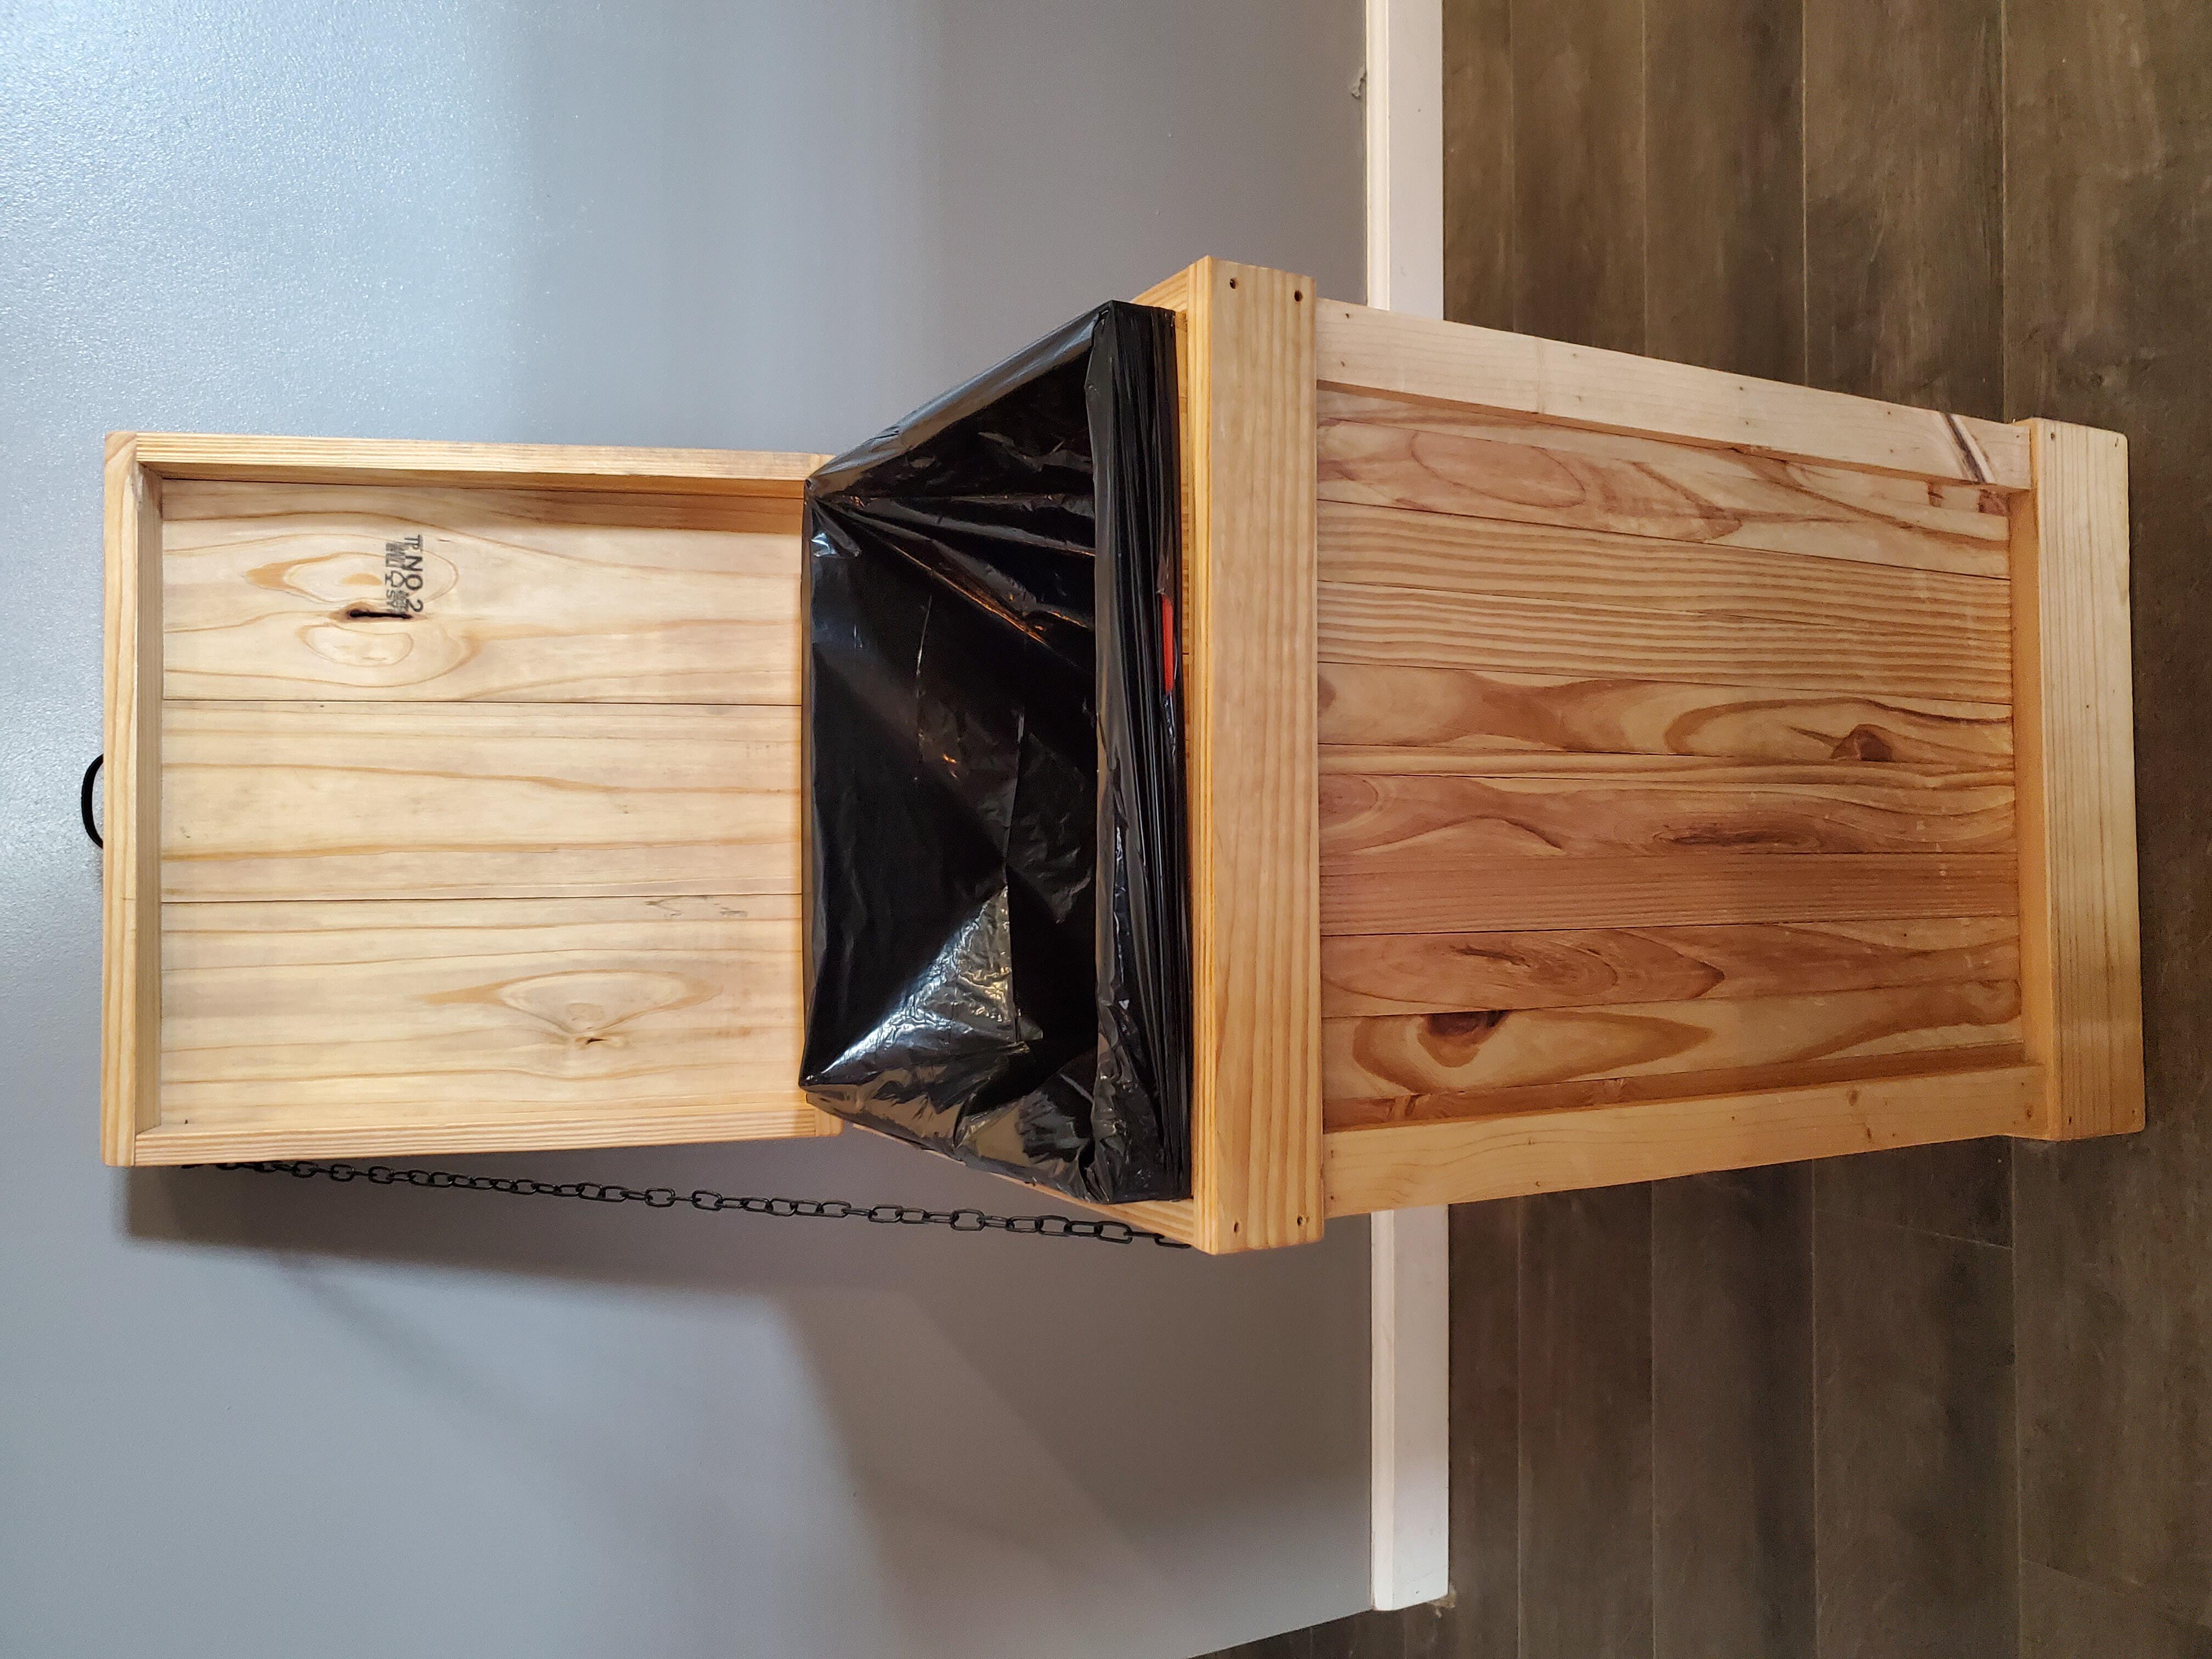 How To Make A Wooden Trash Can